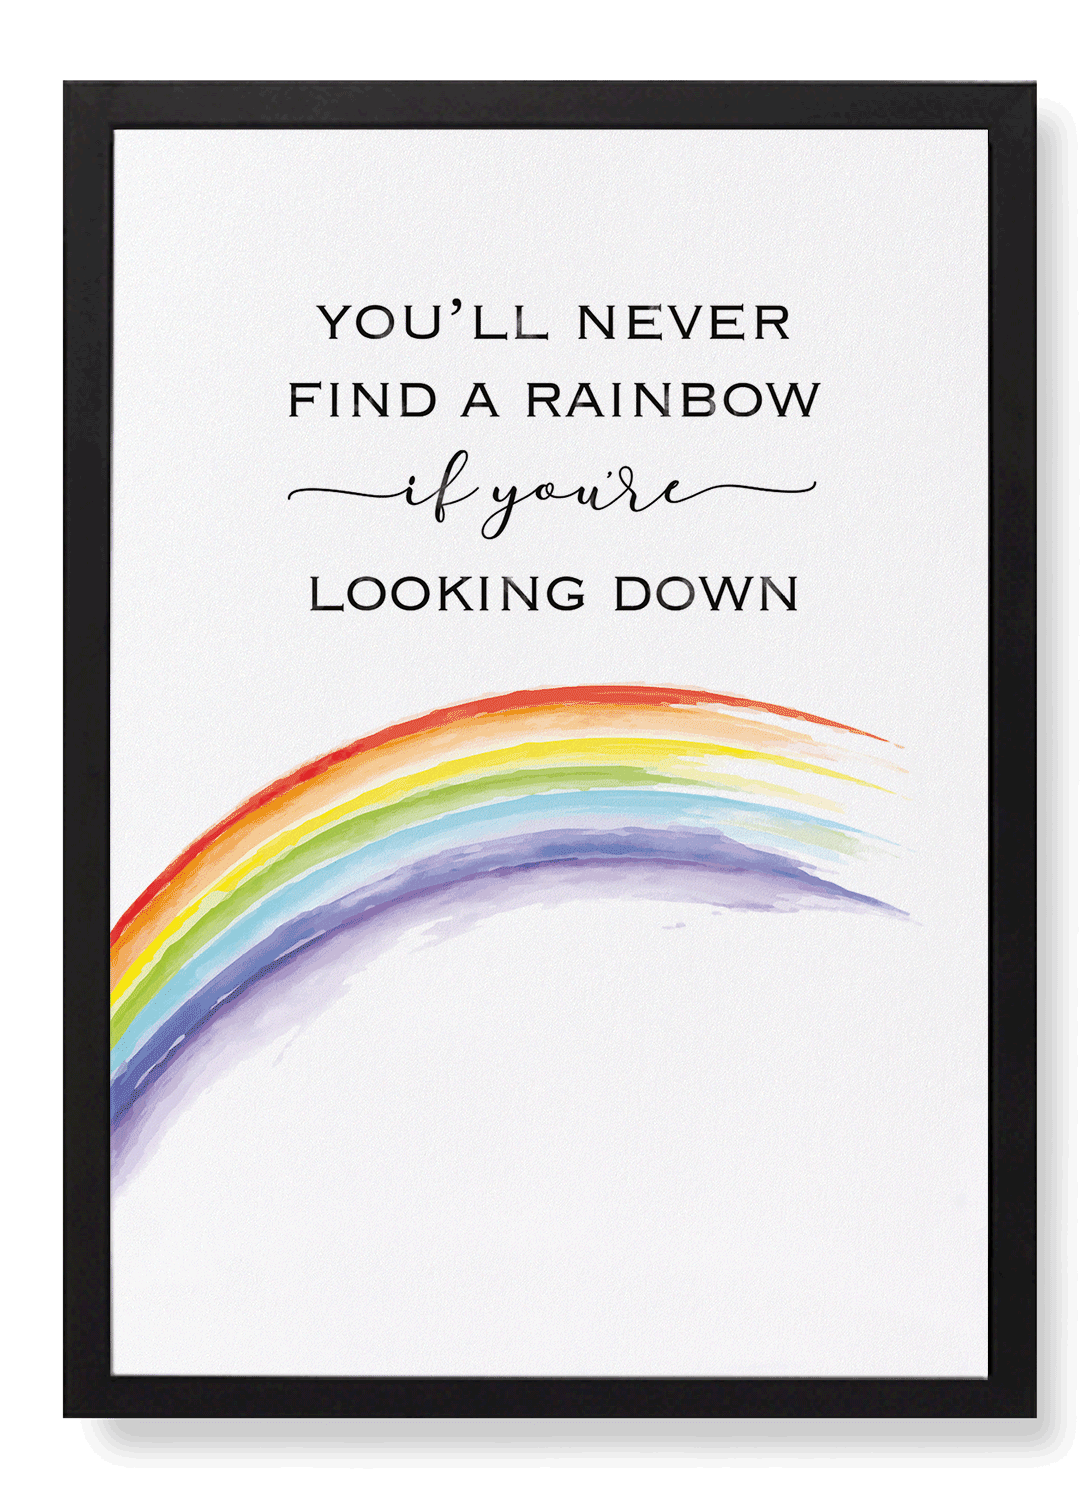 FINDING A RAINBOW